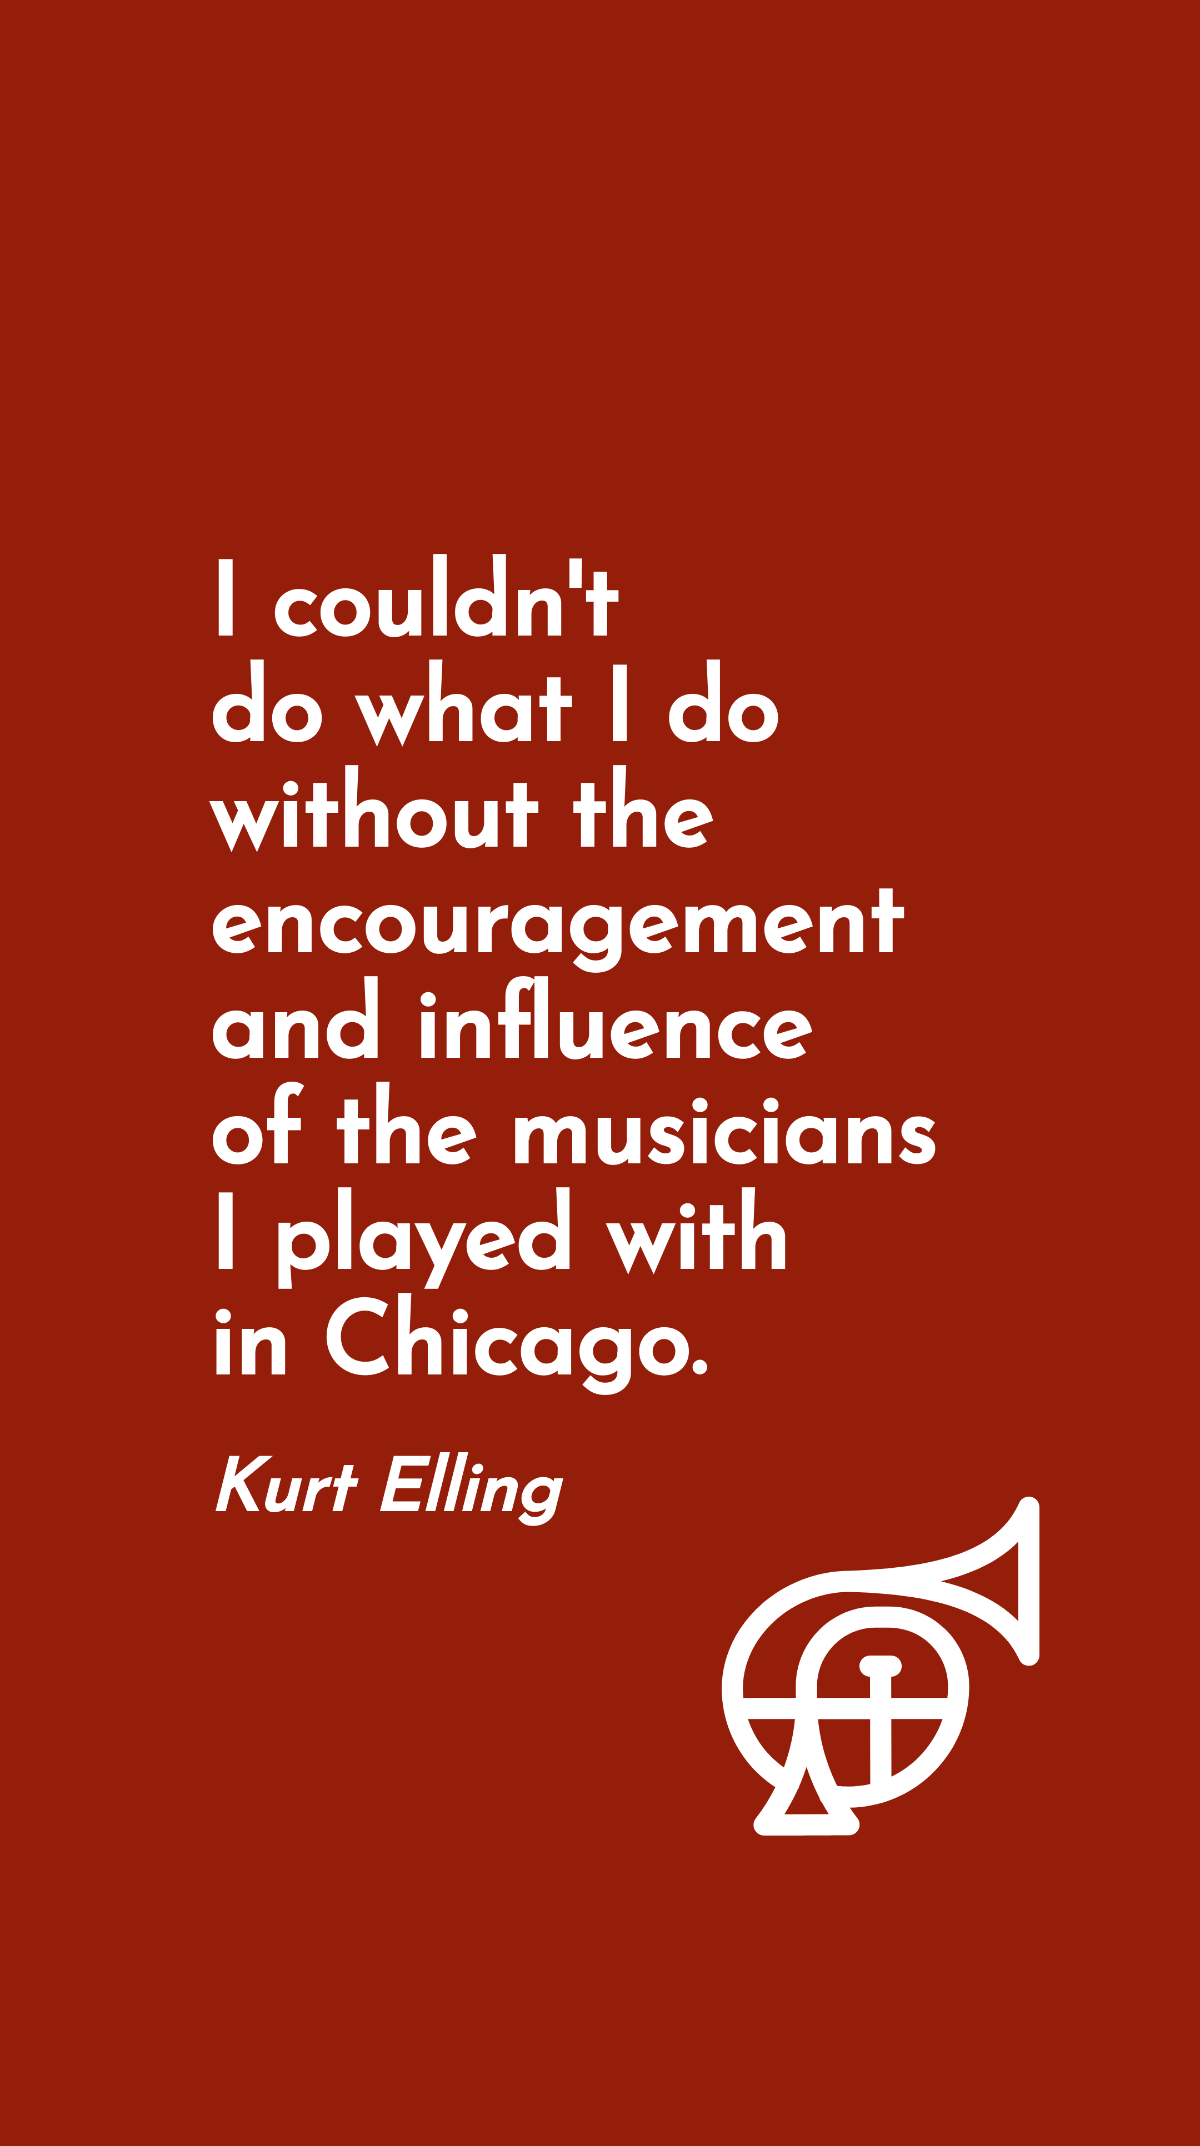 Kurt Elling - I couldn't do what I do without the encouragement and influence of the musicians I played with in Chicago. Template